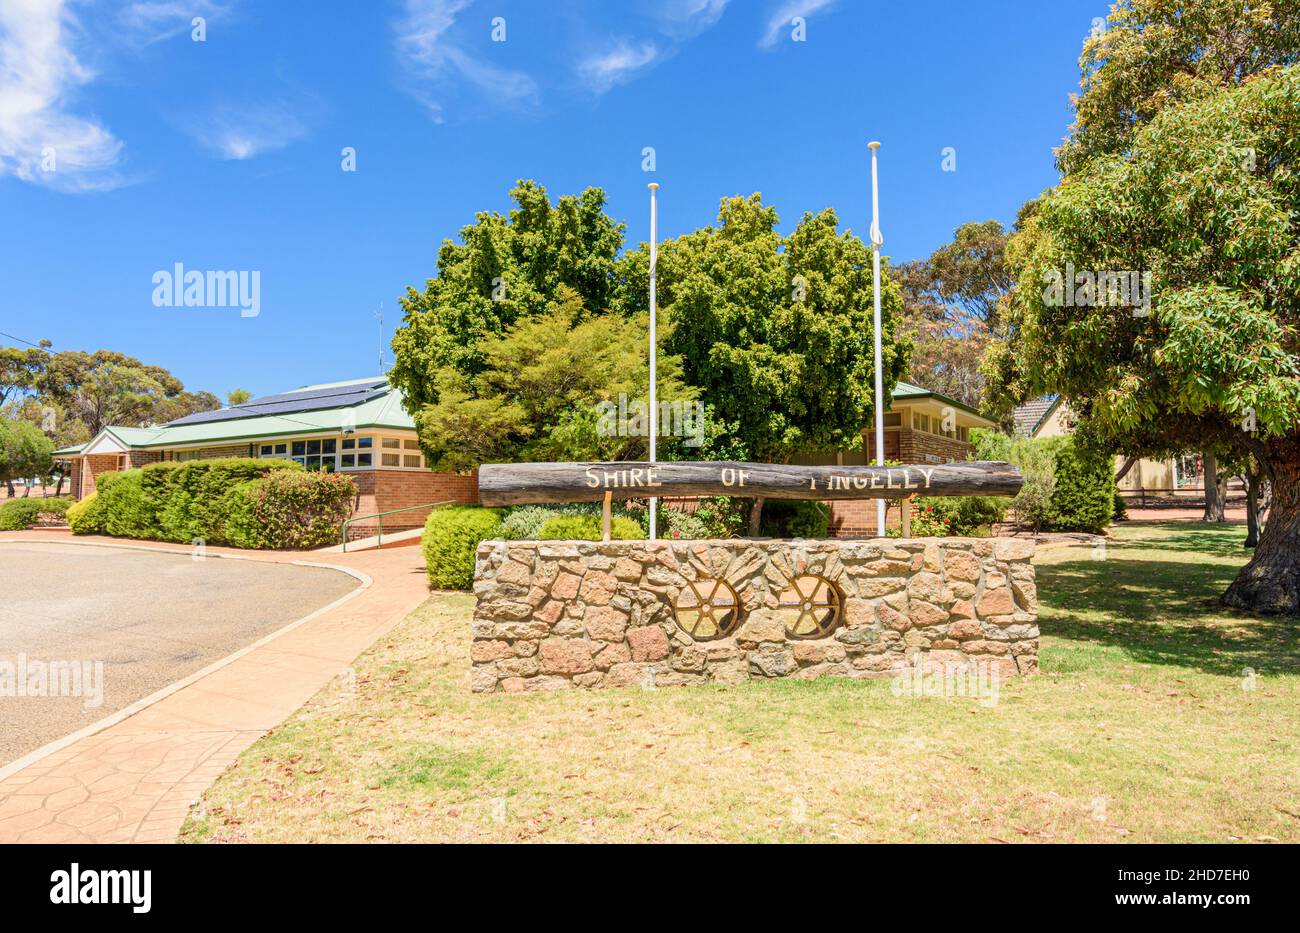 Shire of Pingelly Local Government Offices, Pingelly, Western Australia, Australien Stockfoto